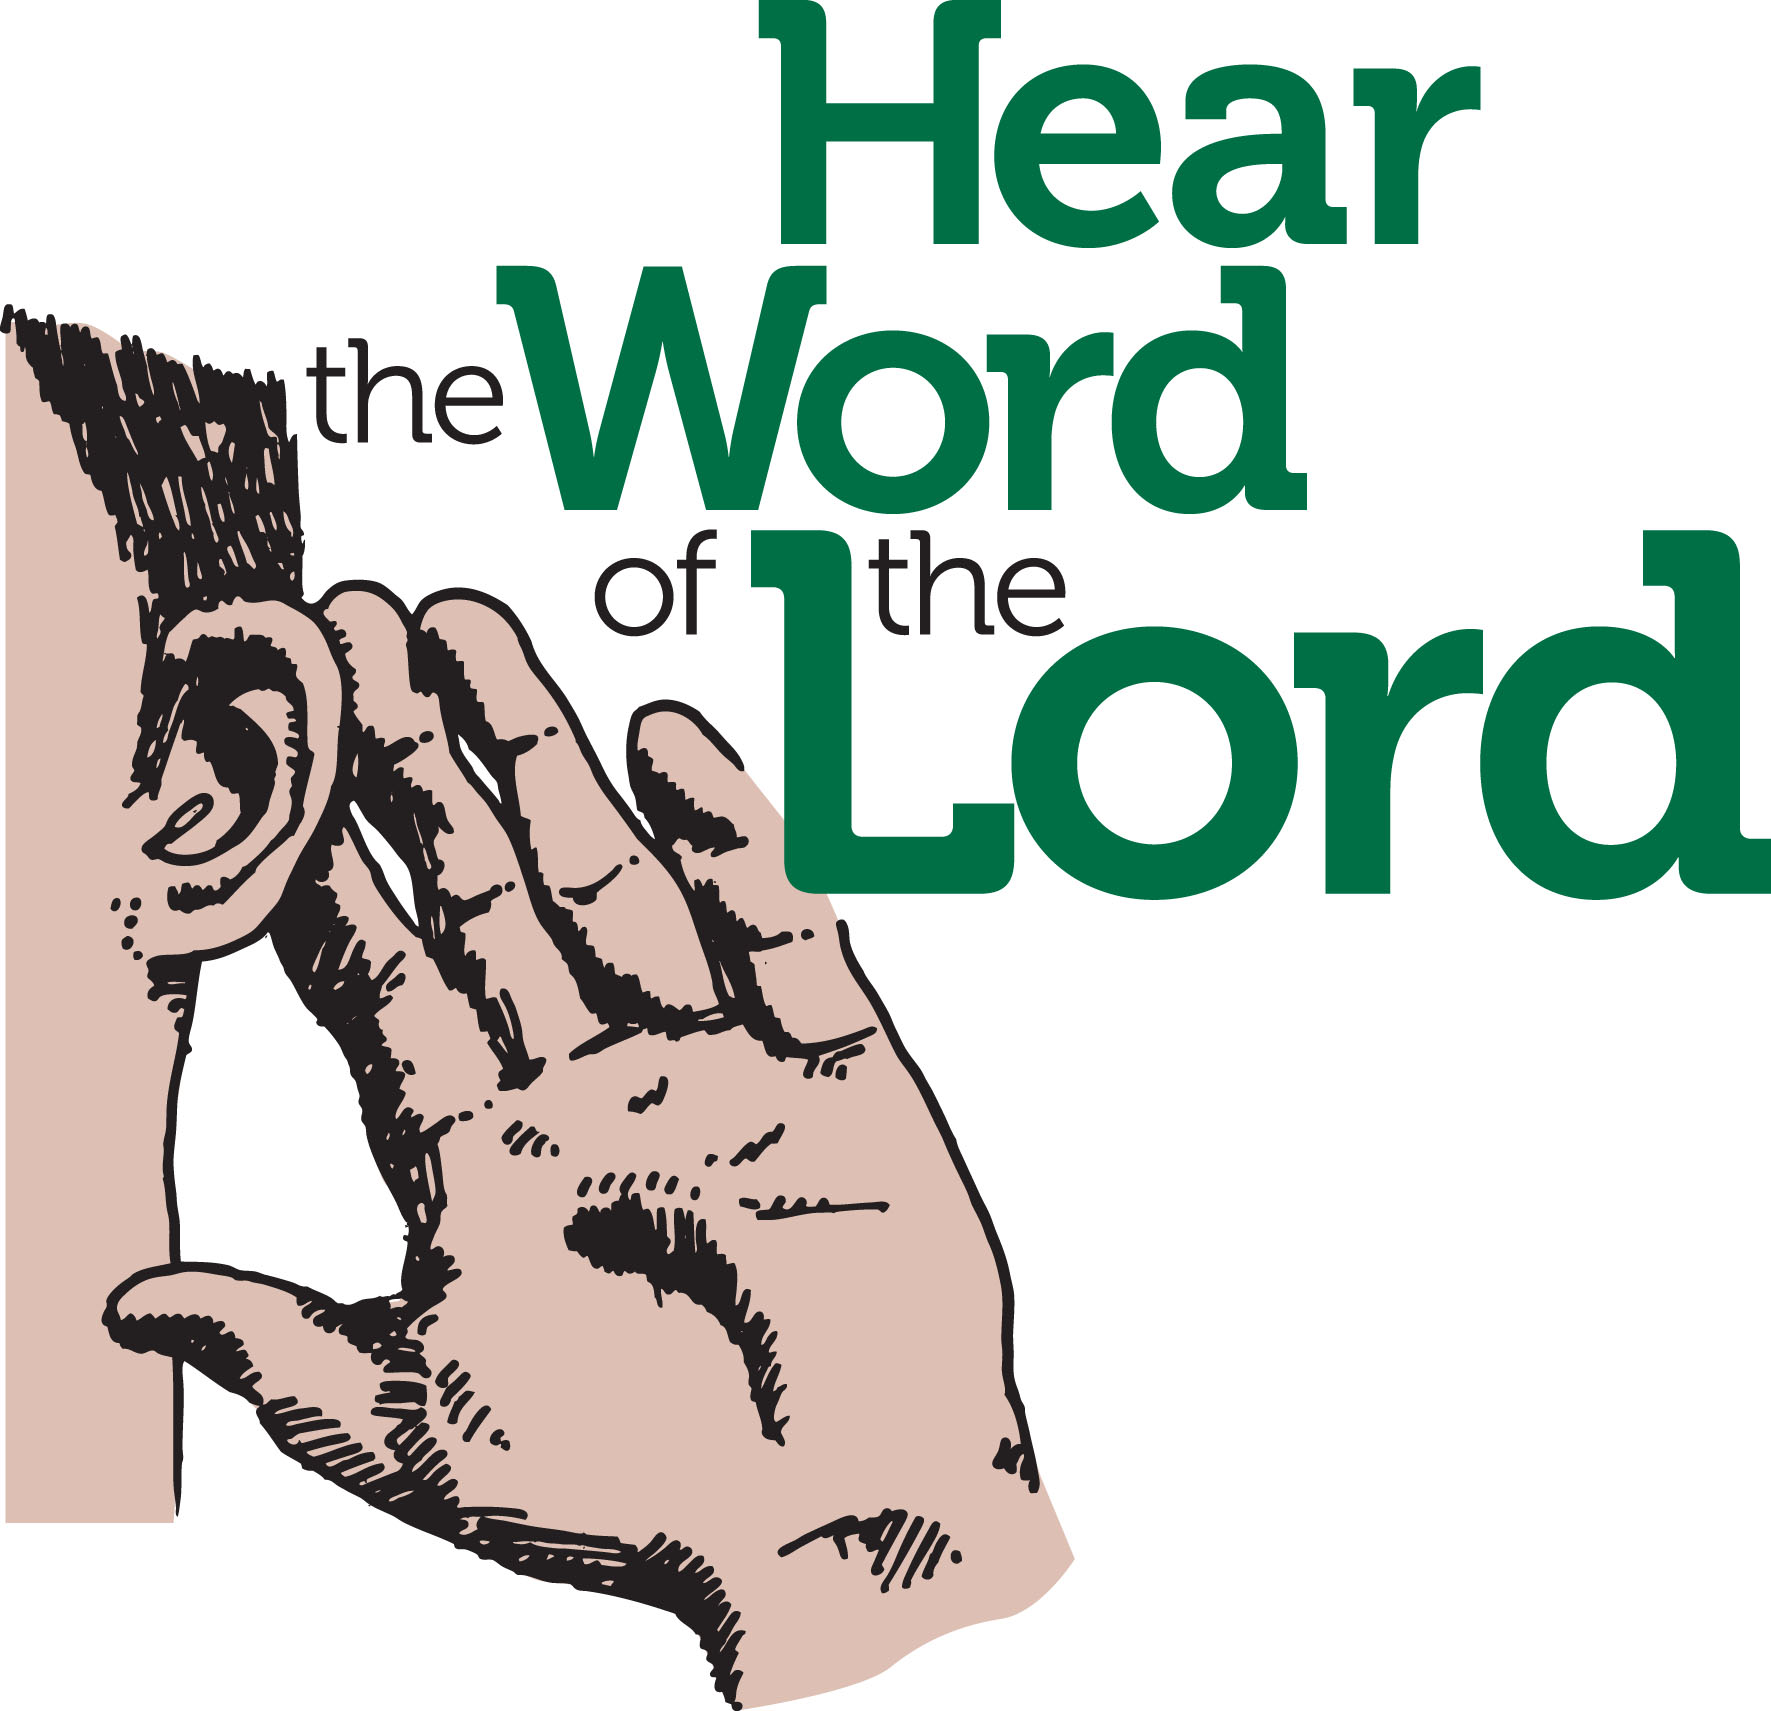 a hand to an ear with text hear the word of the lord